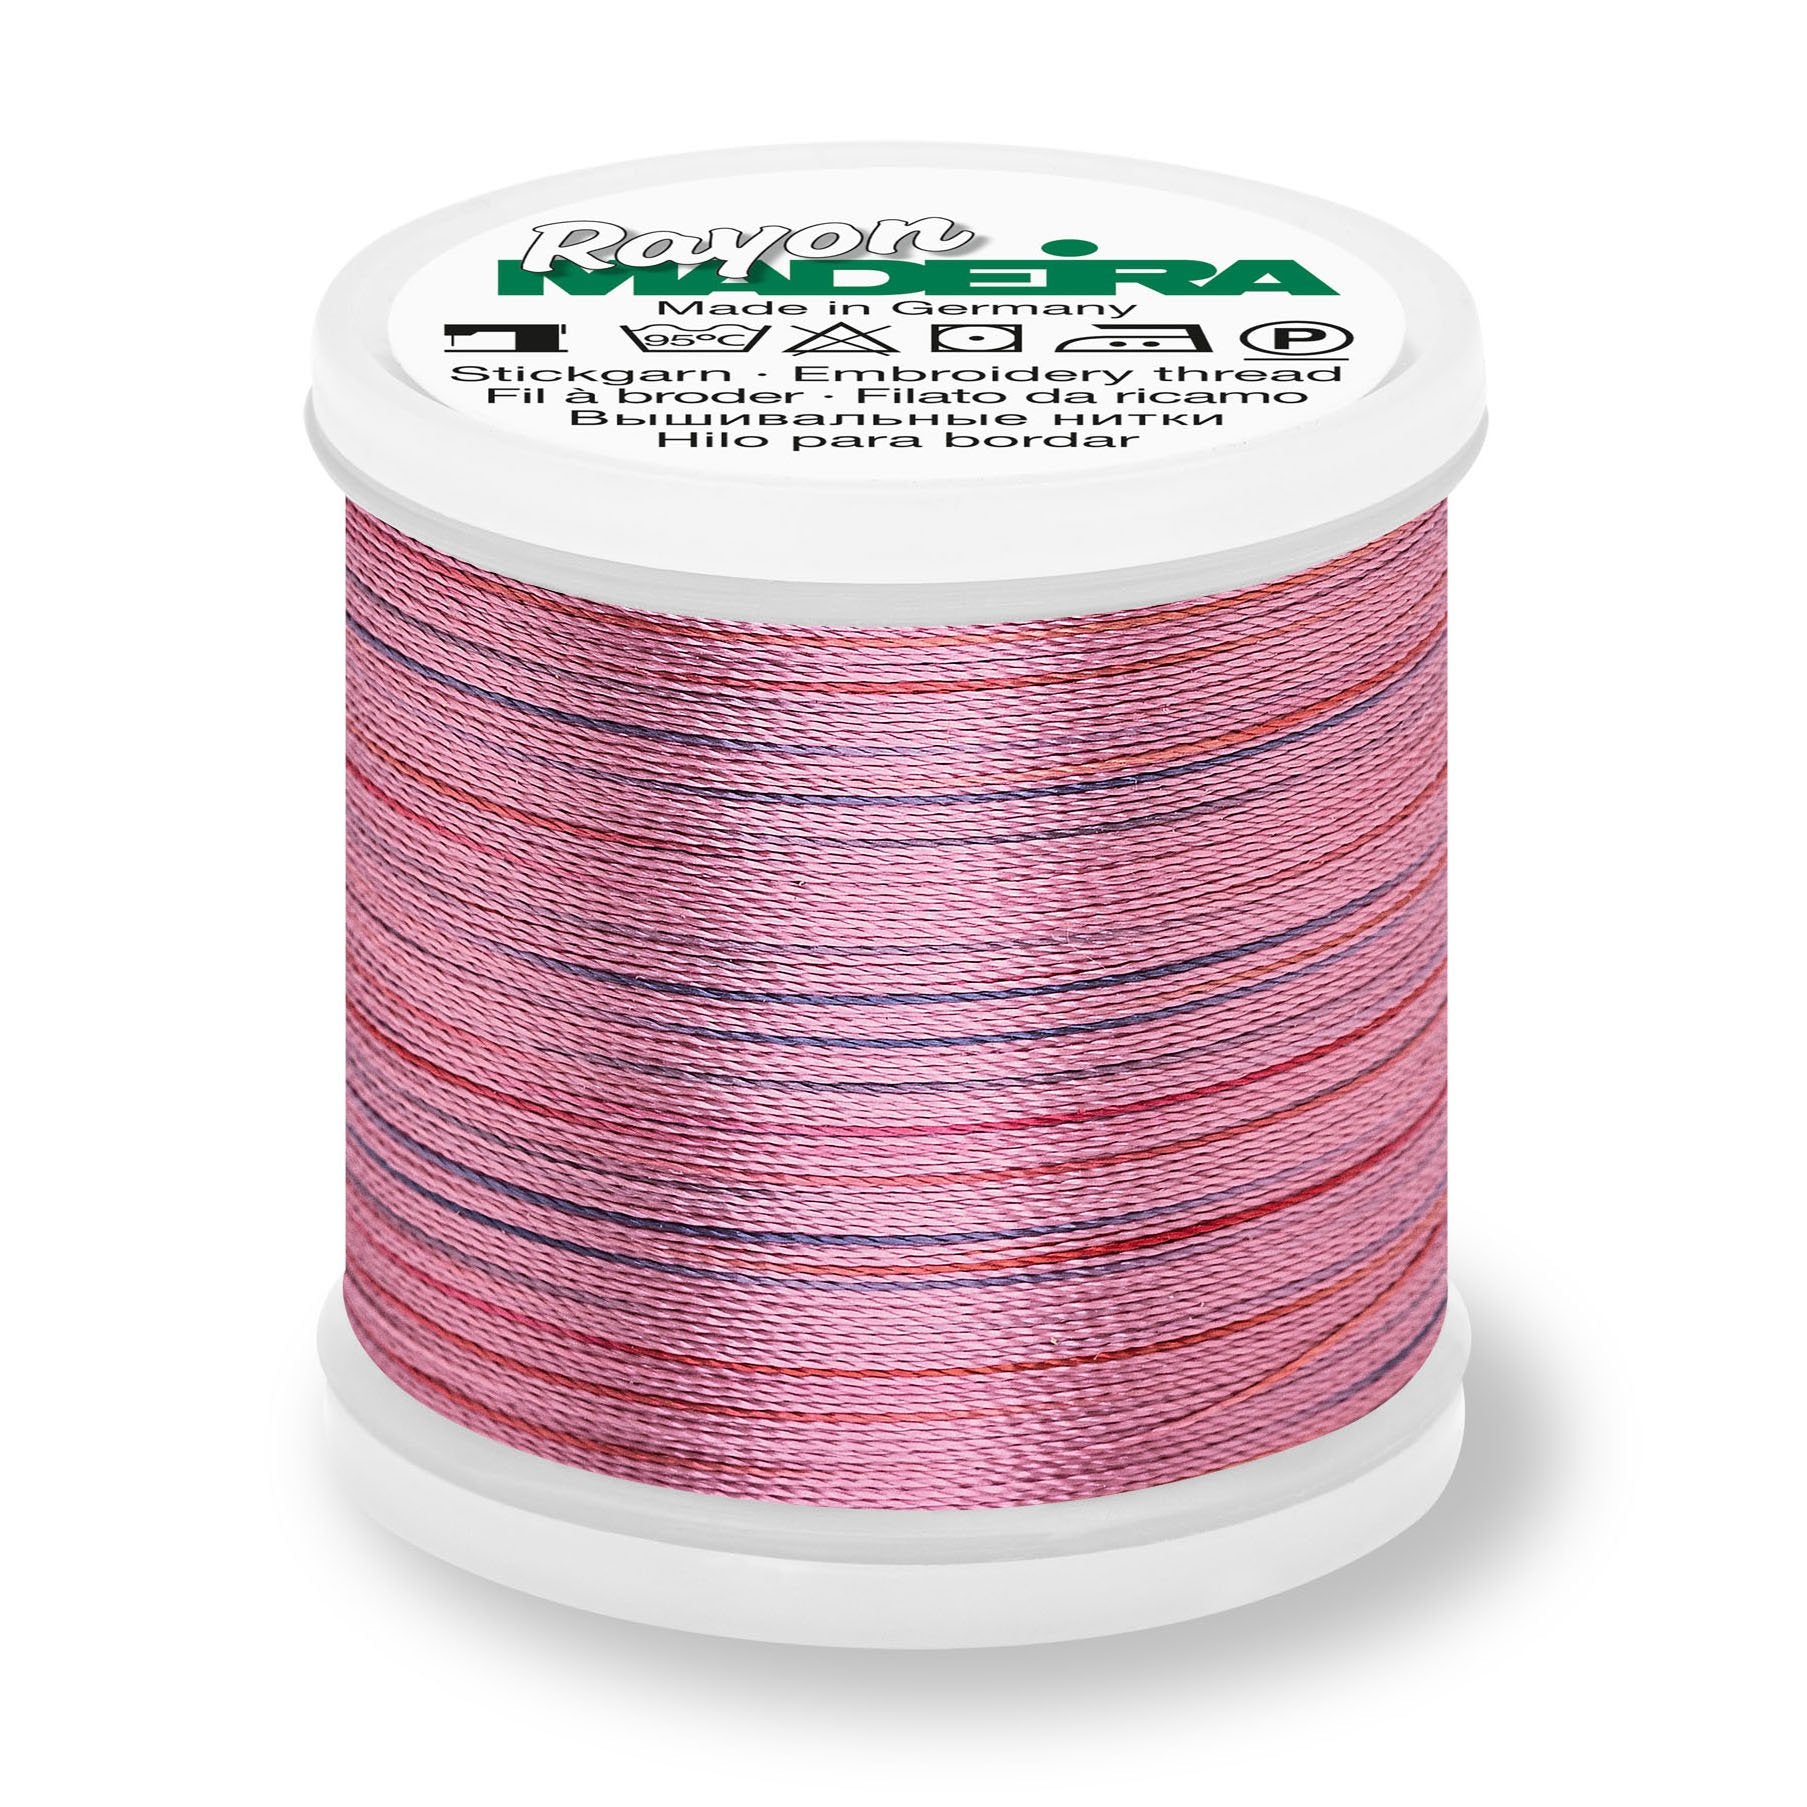 Madeira Rayon 40 Embroidery Thread 200m Potpourri 2305 Light Pink from Jaycotts Sewing Supplies